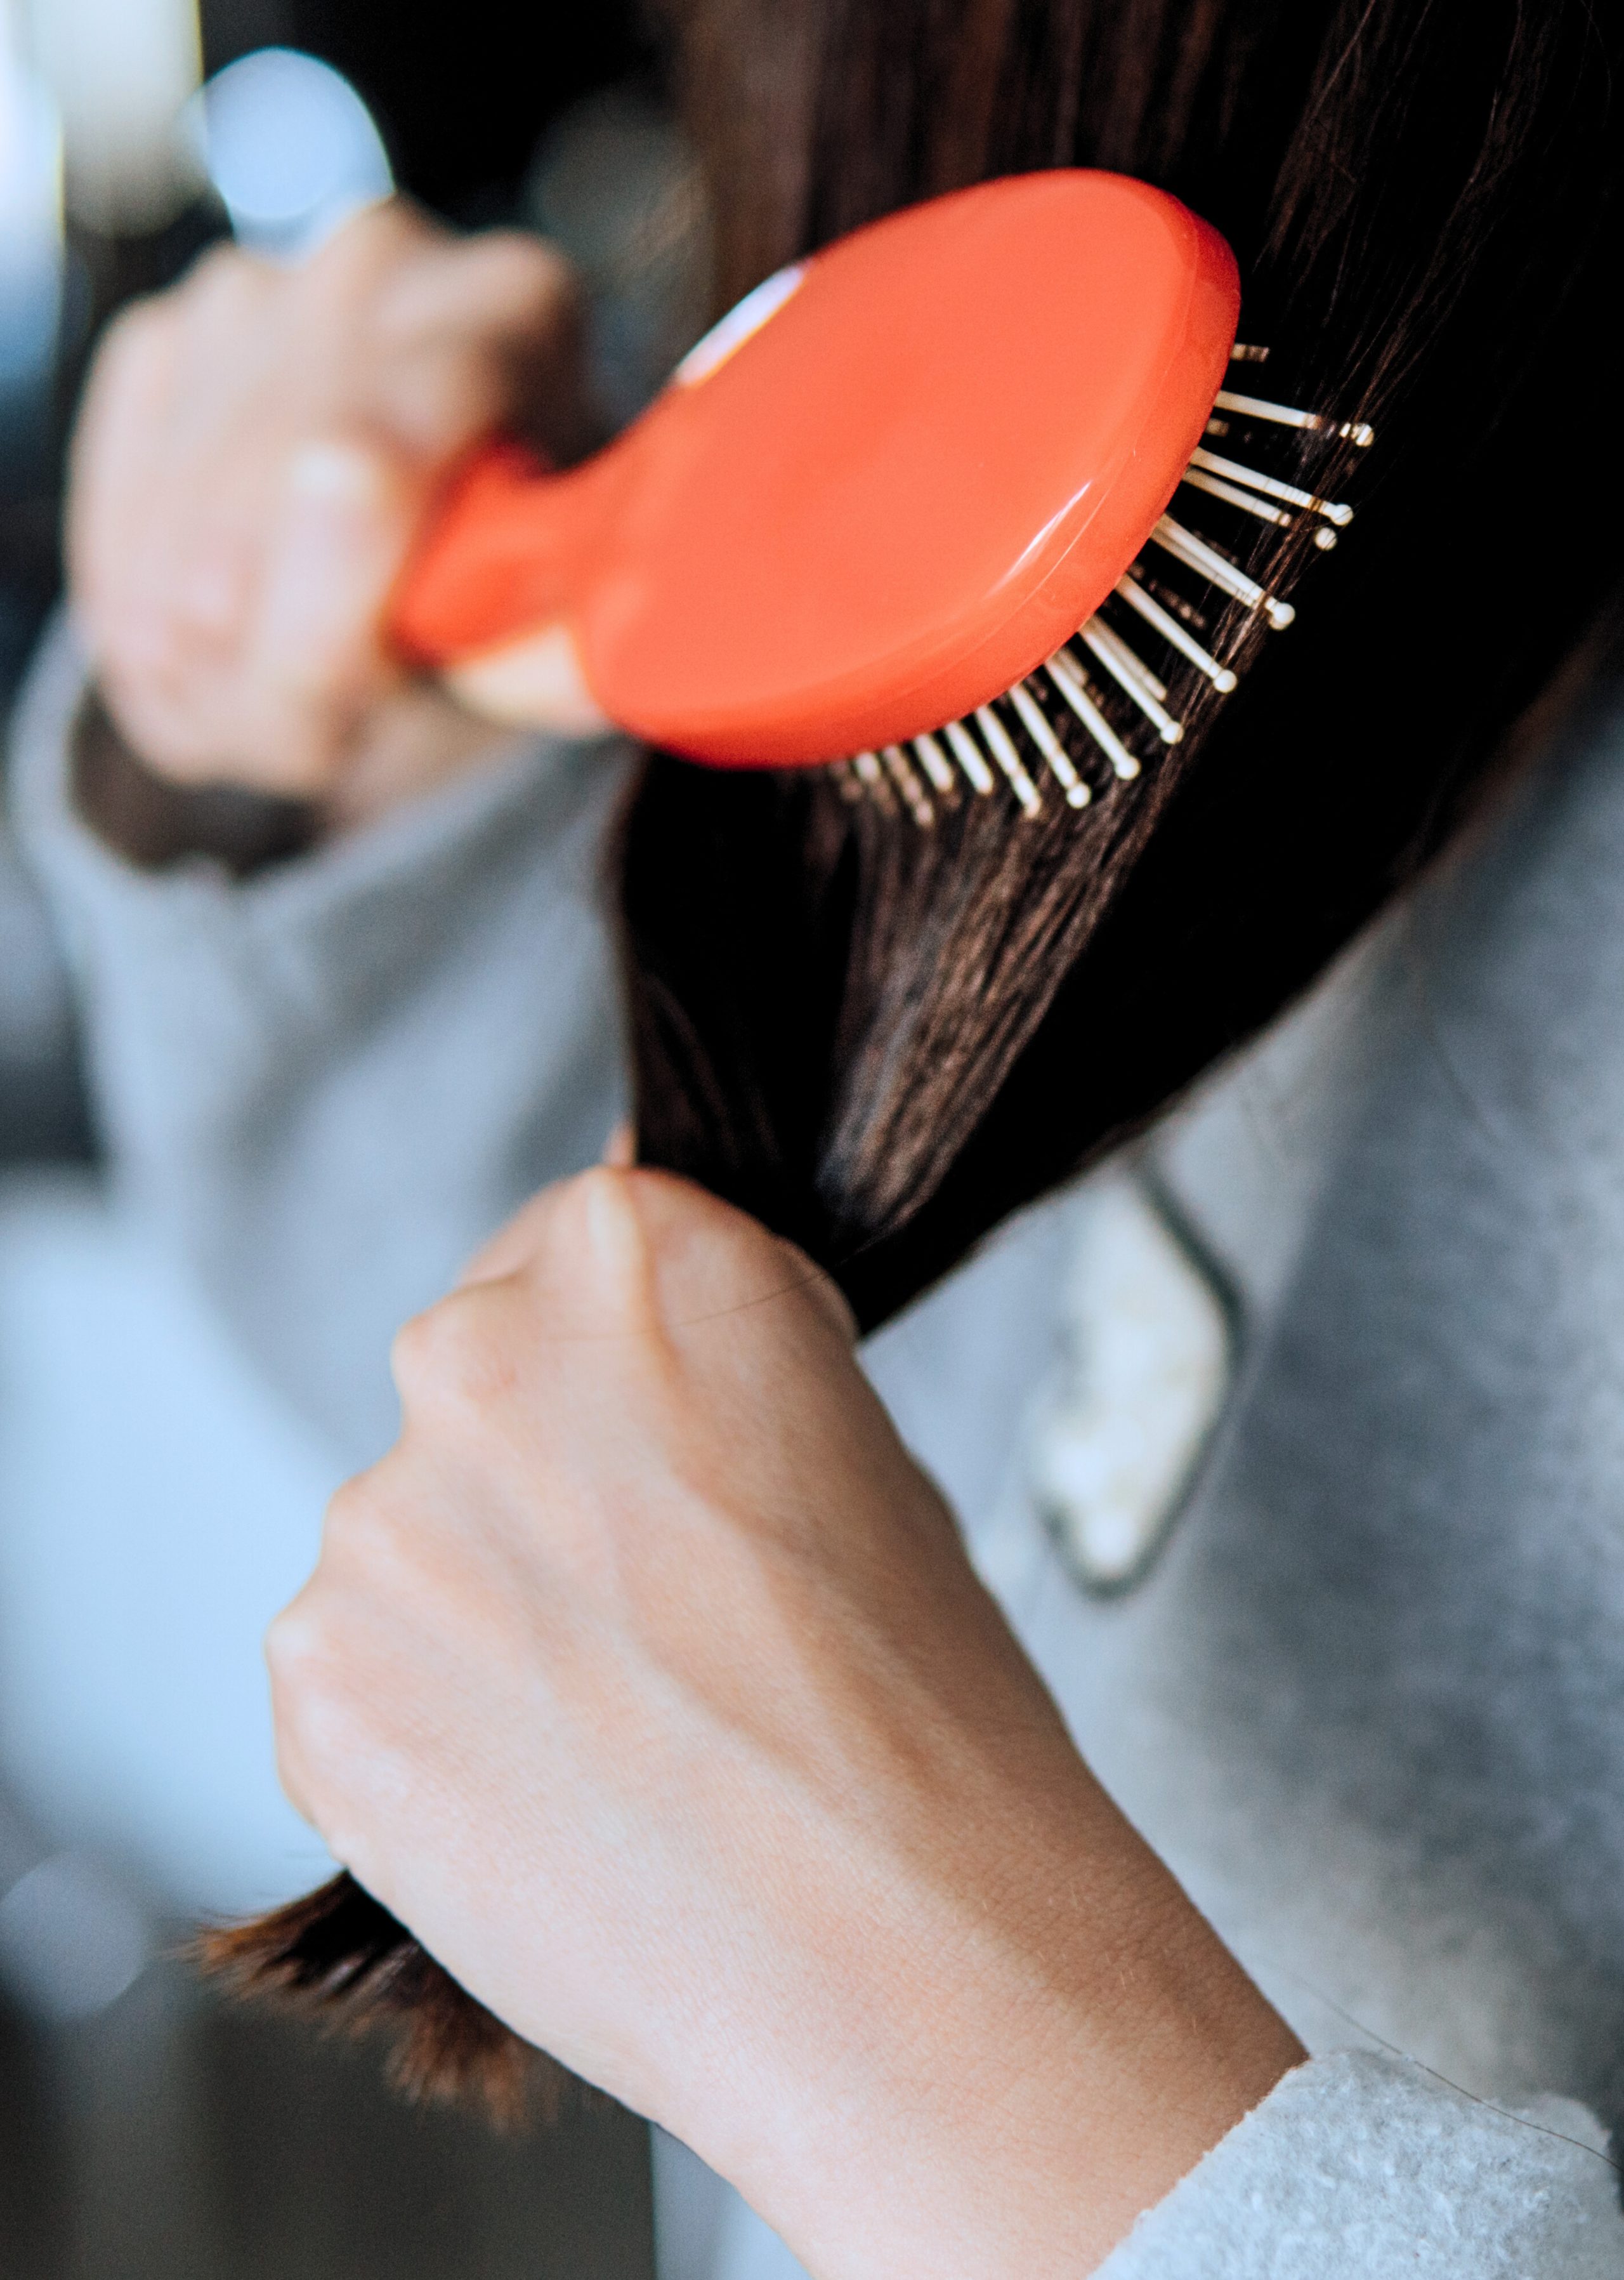 Myth 4: The more you brush your hair, the healthier it will be